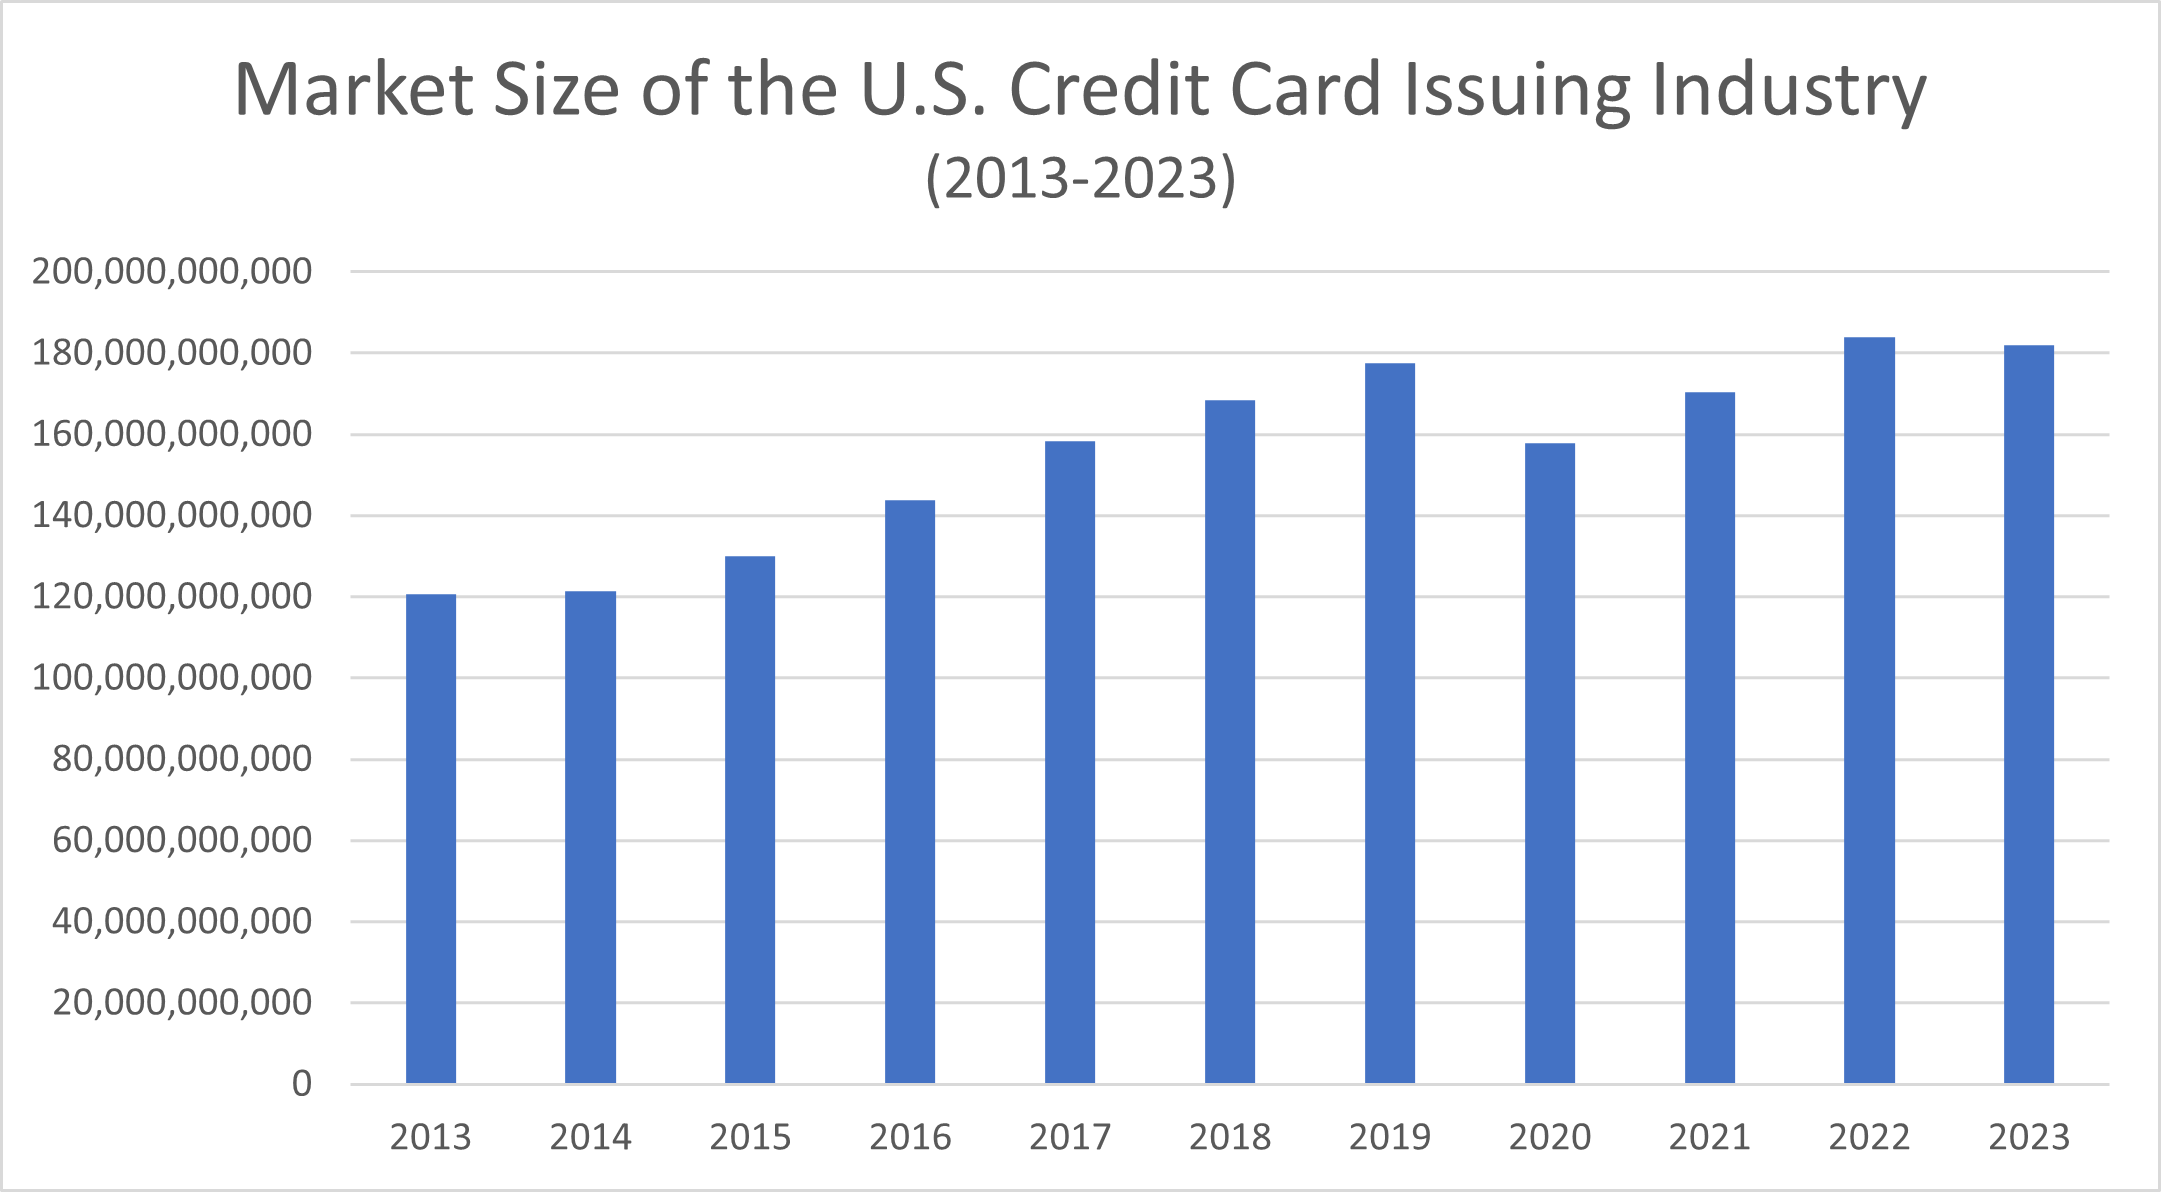 Market Size of the U.S. Credit Card Issuing Industry (2013-2023)